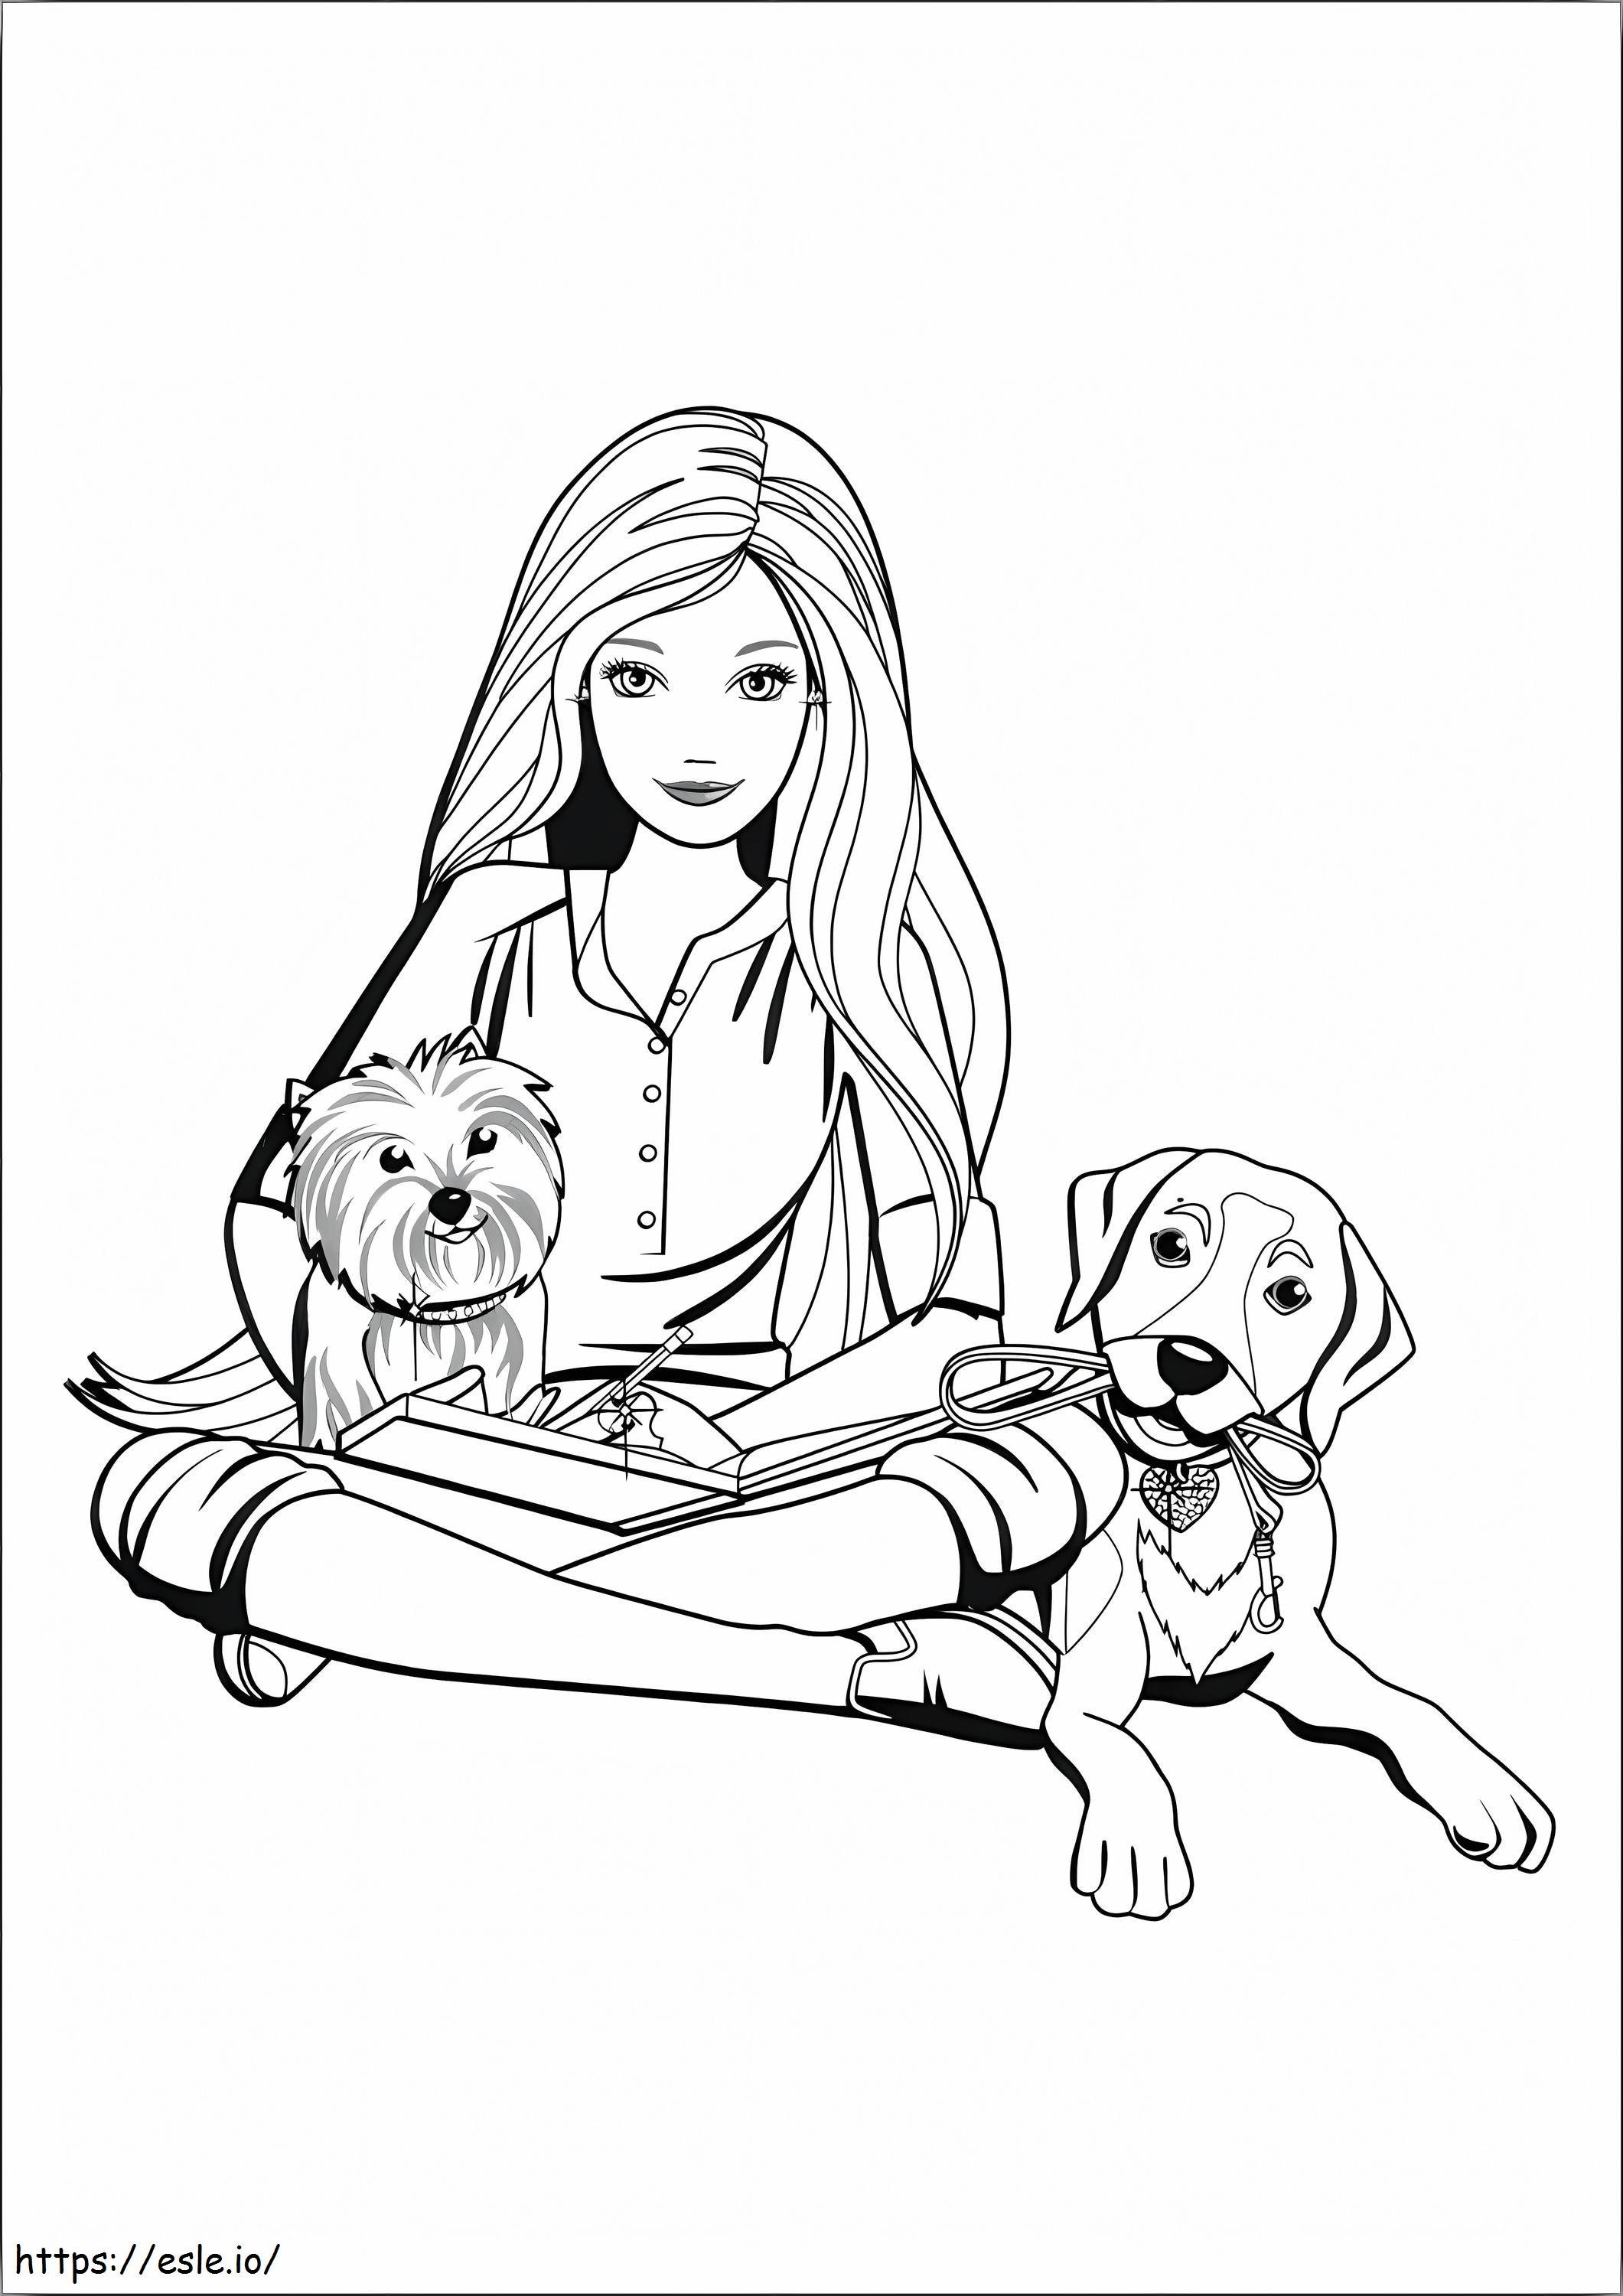 Barbie And Two Dogs coloring page